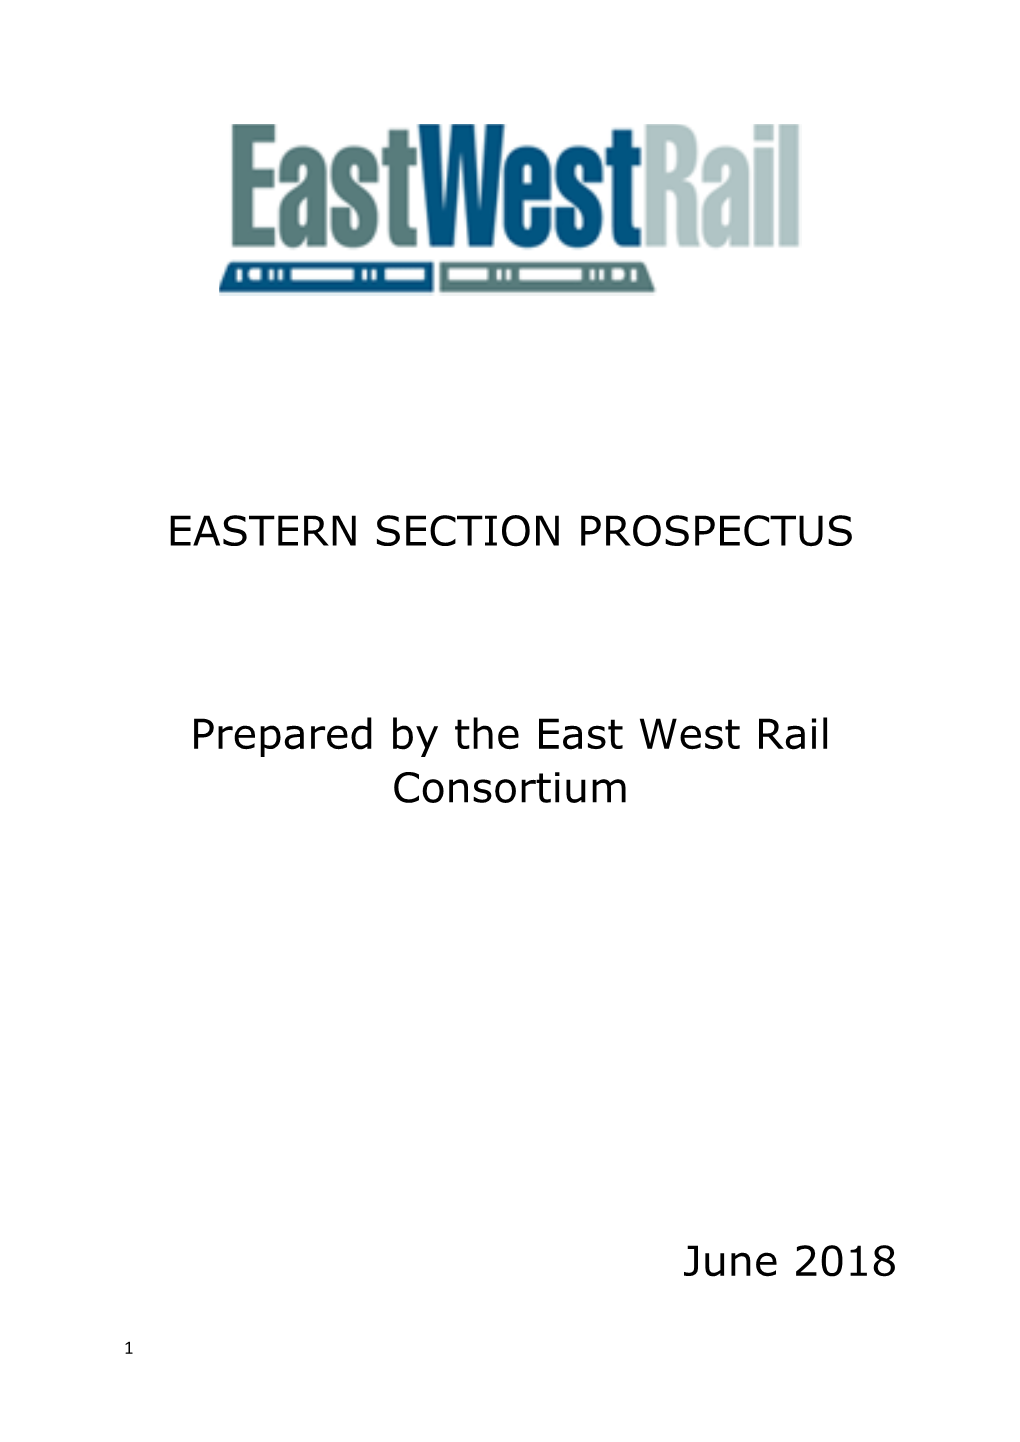 EASTERN SECTION PROSPECTUS Prepared by the East West Rail